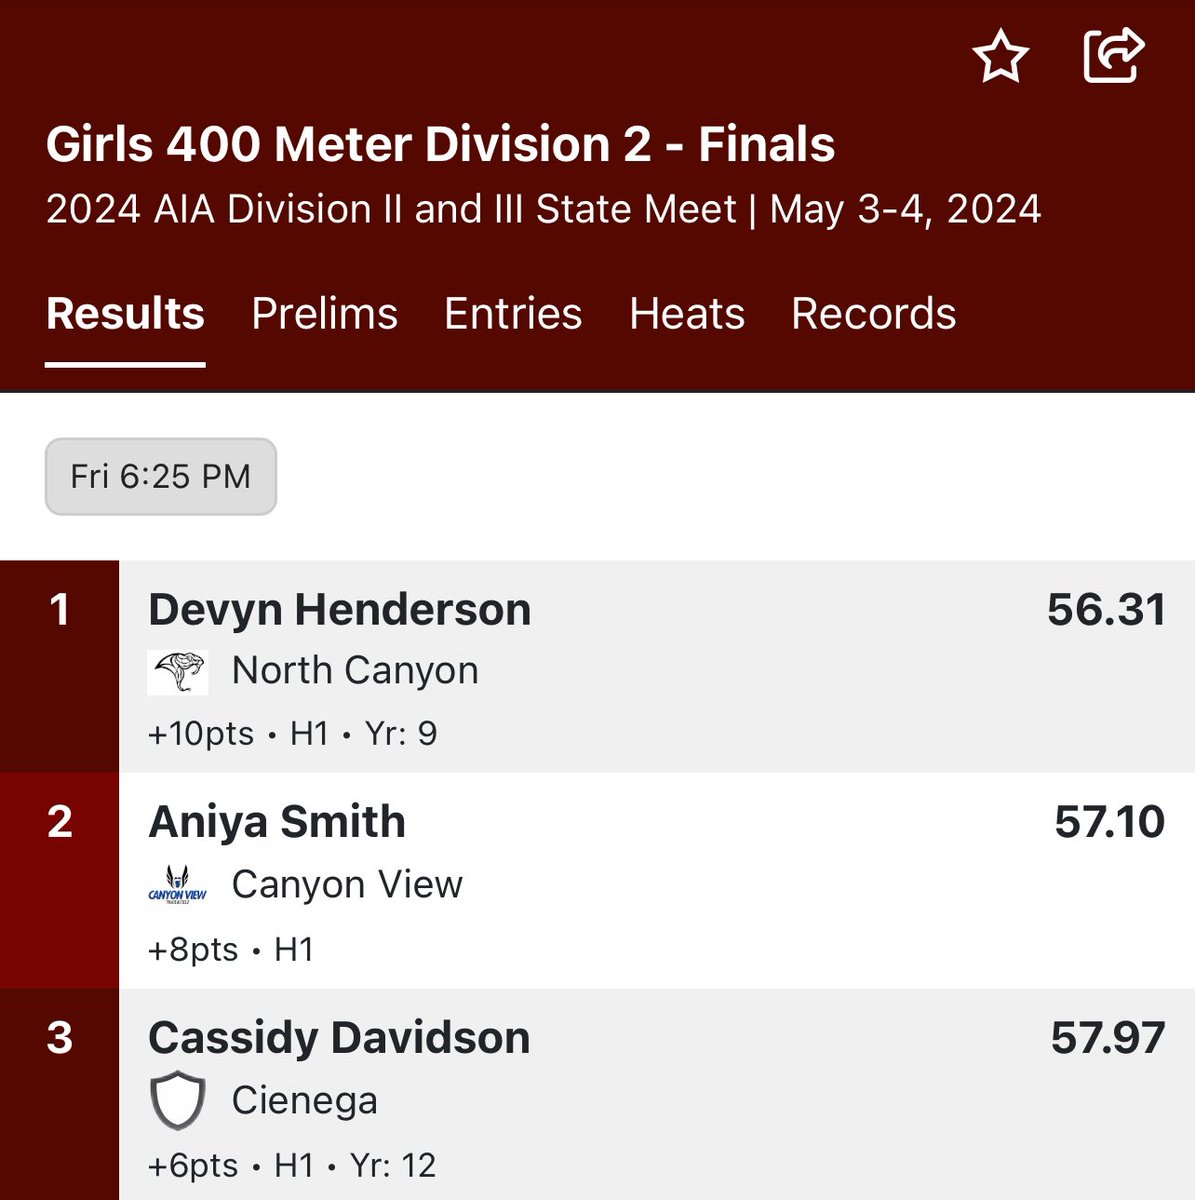 North Canyon freshman Devyn Henderson’s sweep at the Division III championships went under the radar. Henderson won the 100 meters (12.06), the 200 (24.65) and the 400 (56.31). North Canyon has a rich history in the sport — looks like coach Airabin Justin has another star.